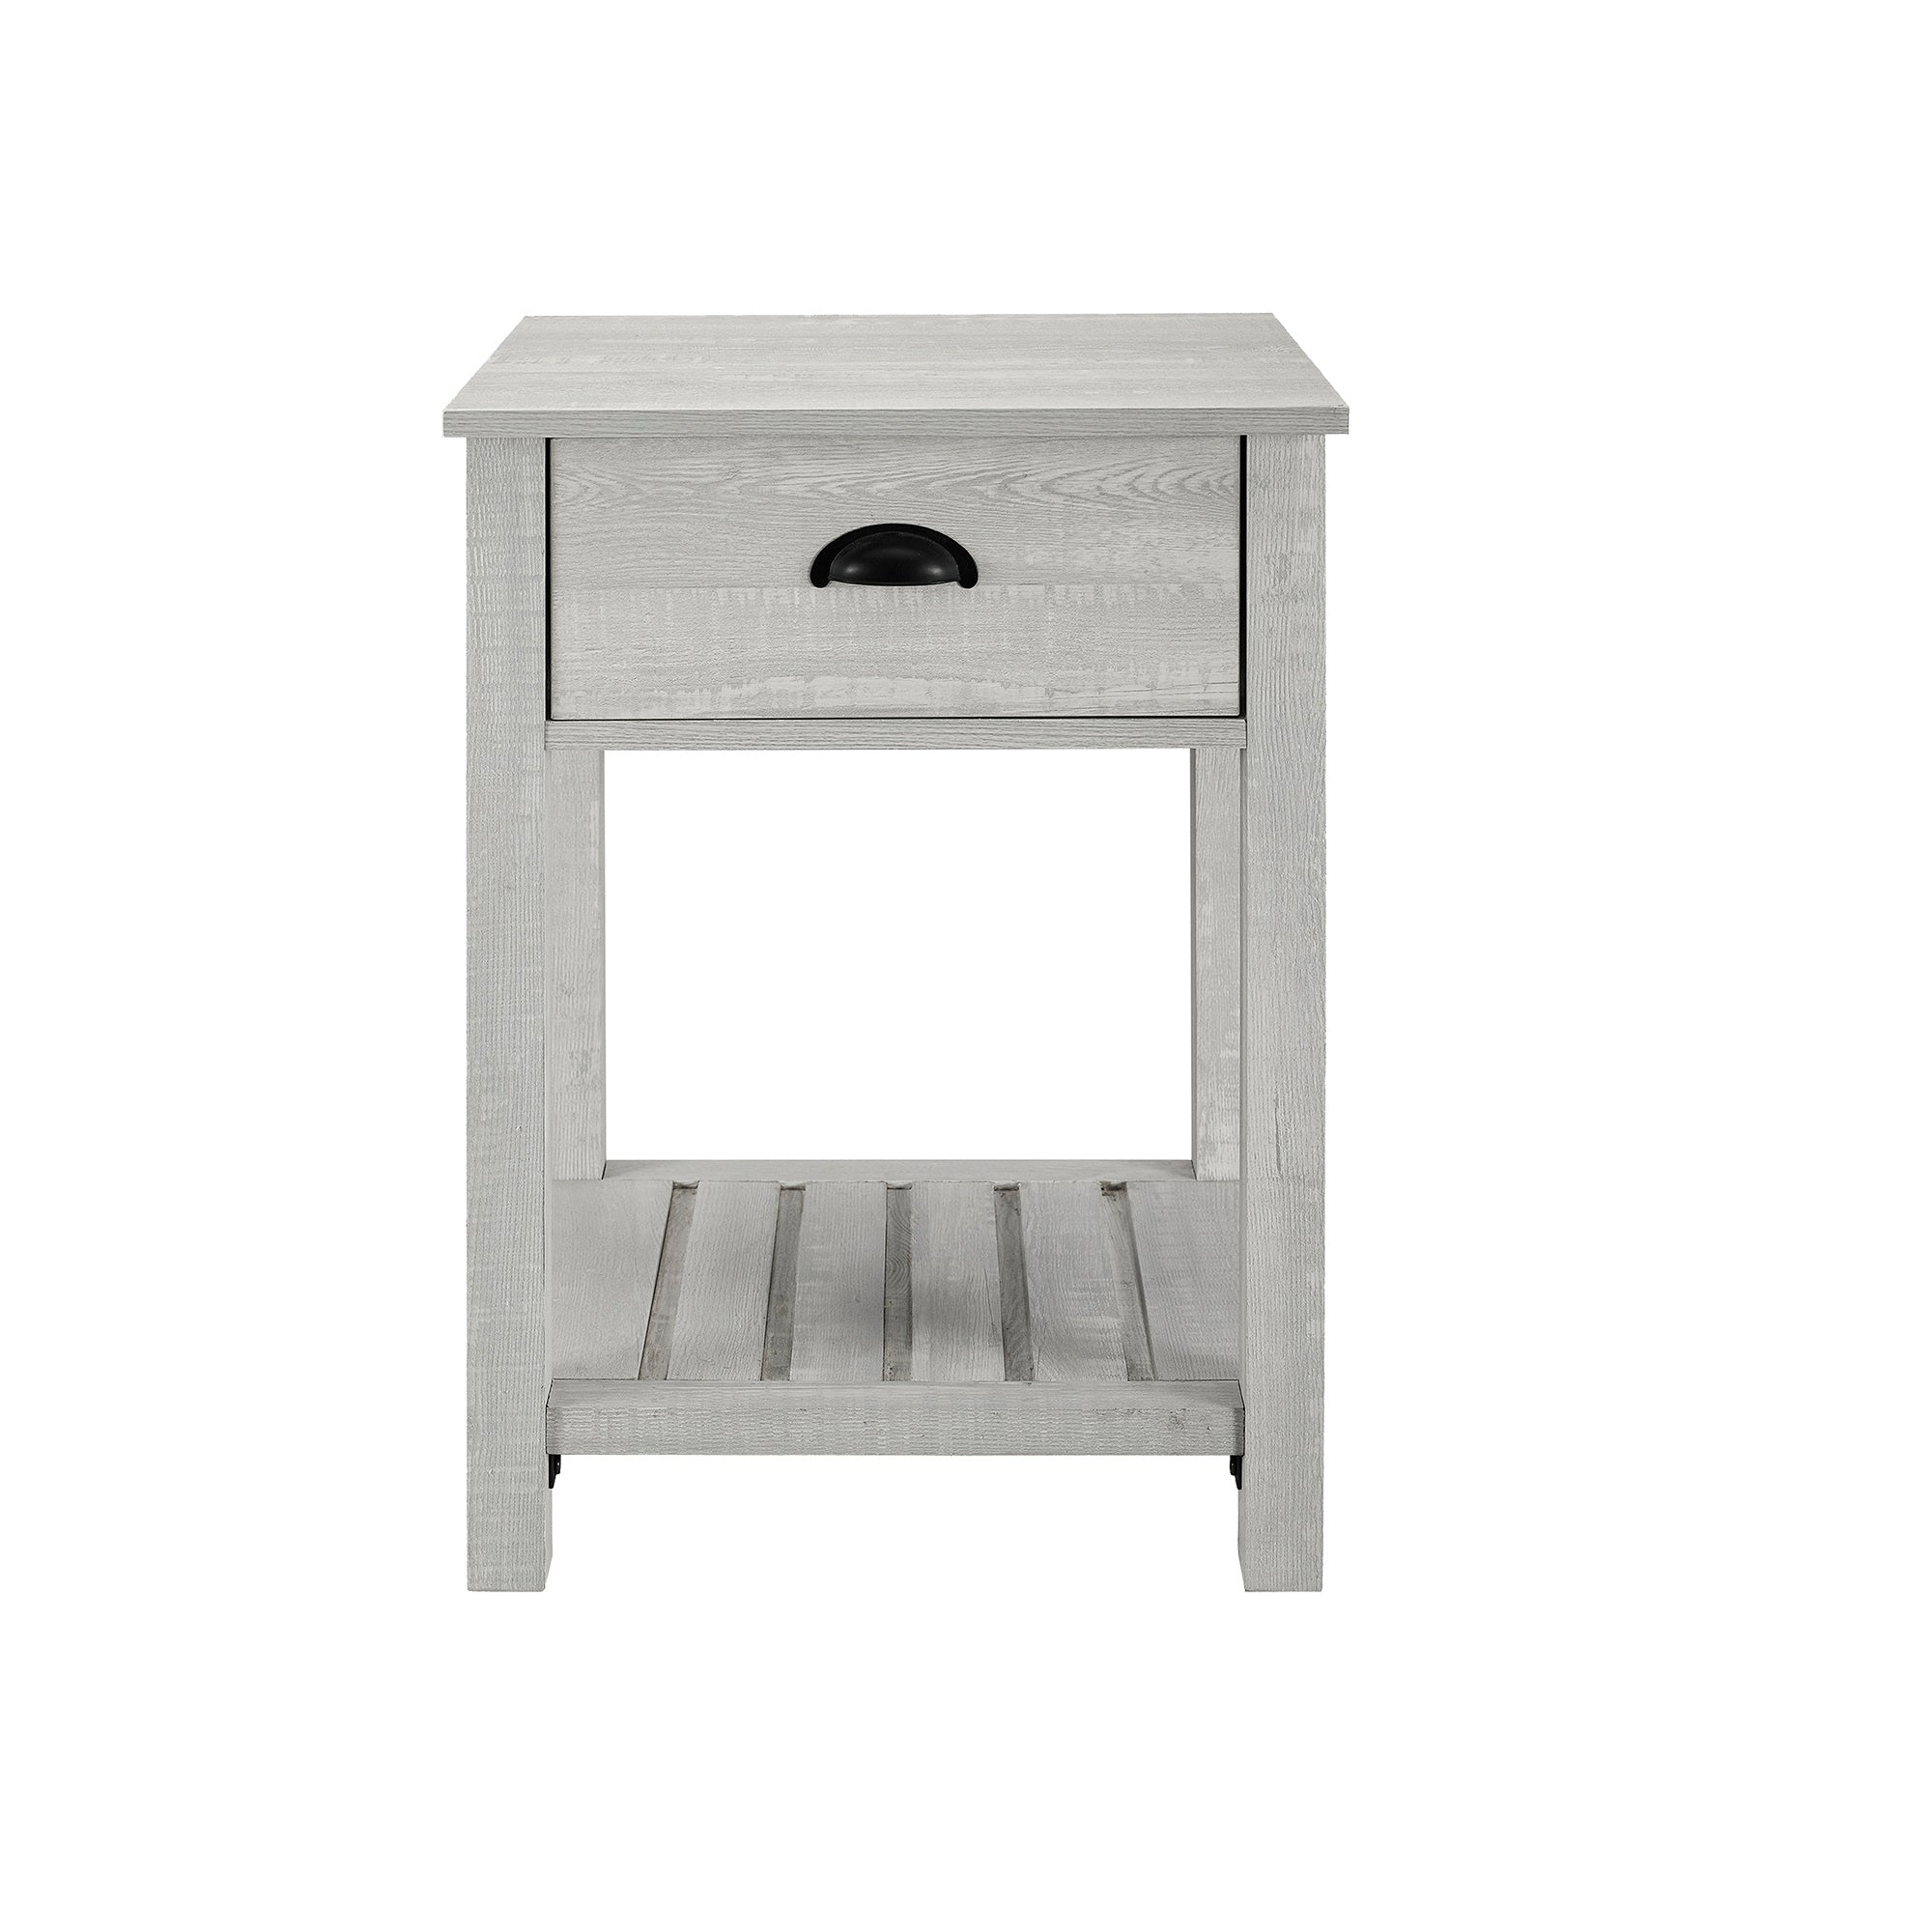 18" Country Single Drawer Nightstand - East Shore Modern Home Furnishings